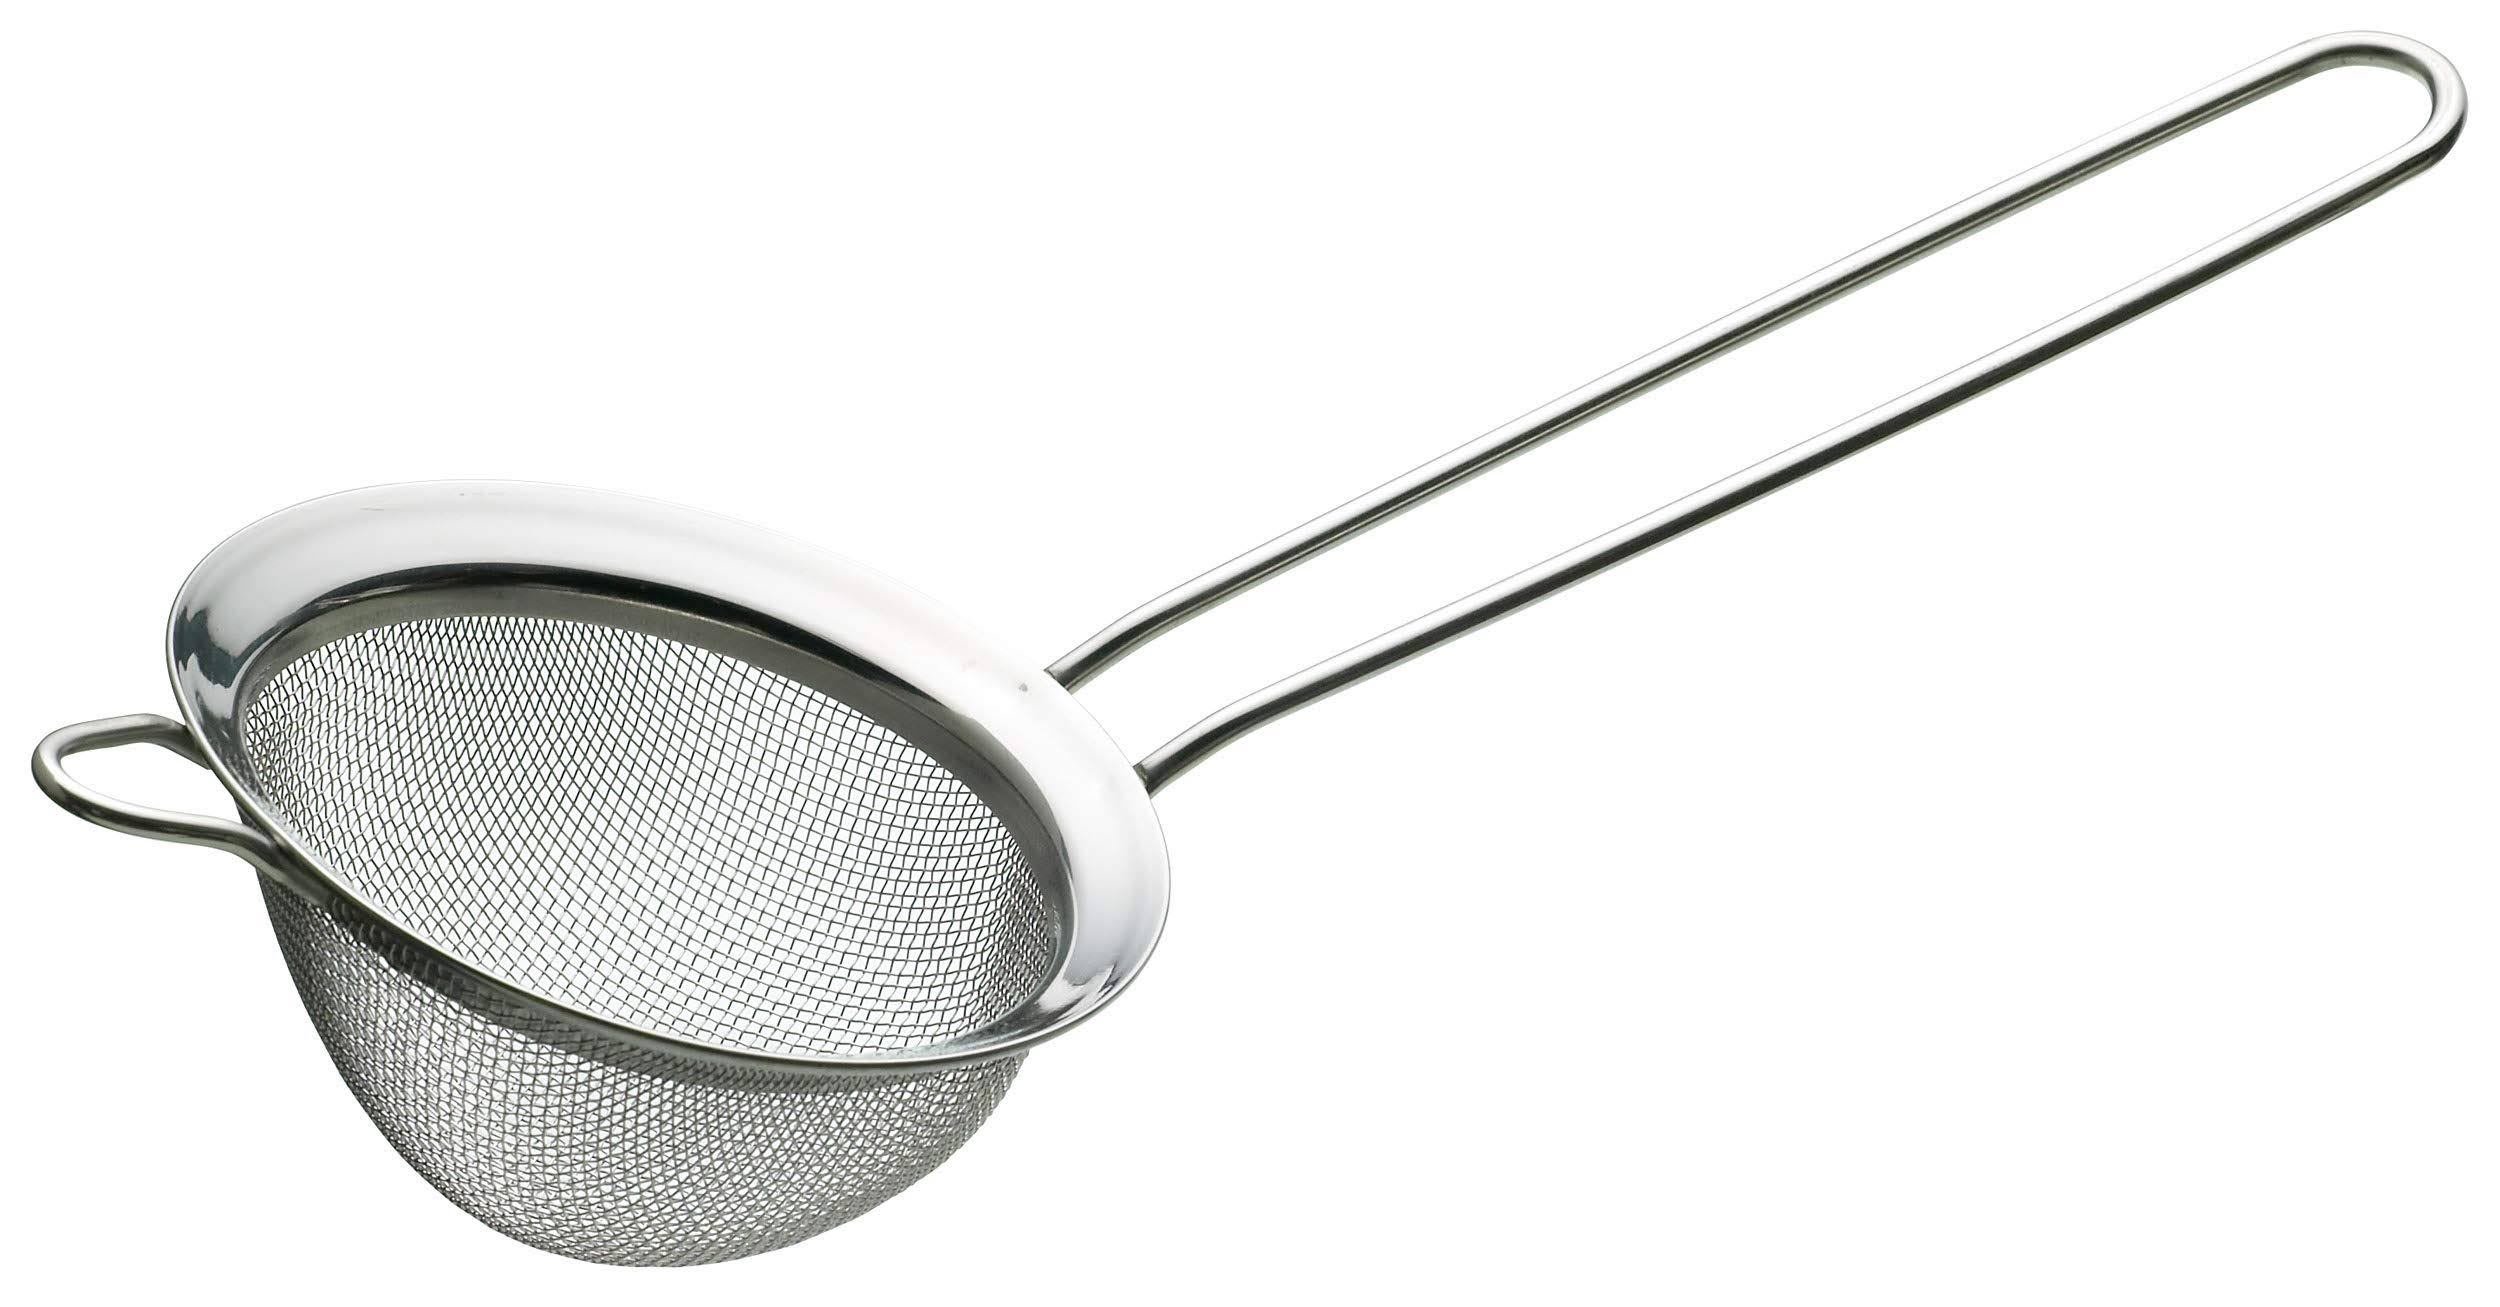 Kitchen Craft Le'Xpress Tea Strainer - Stainless Steel